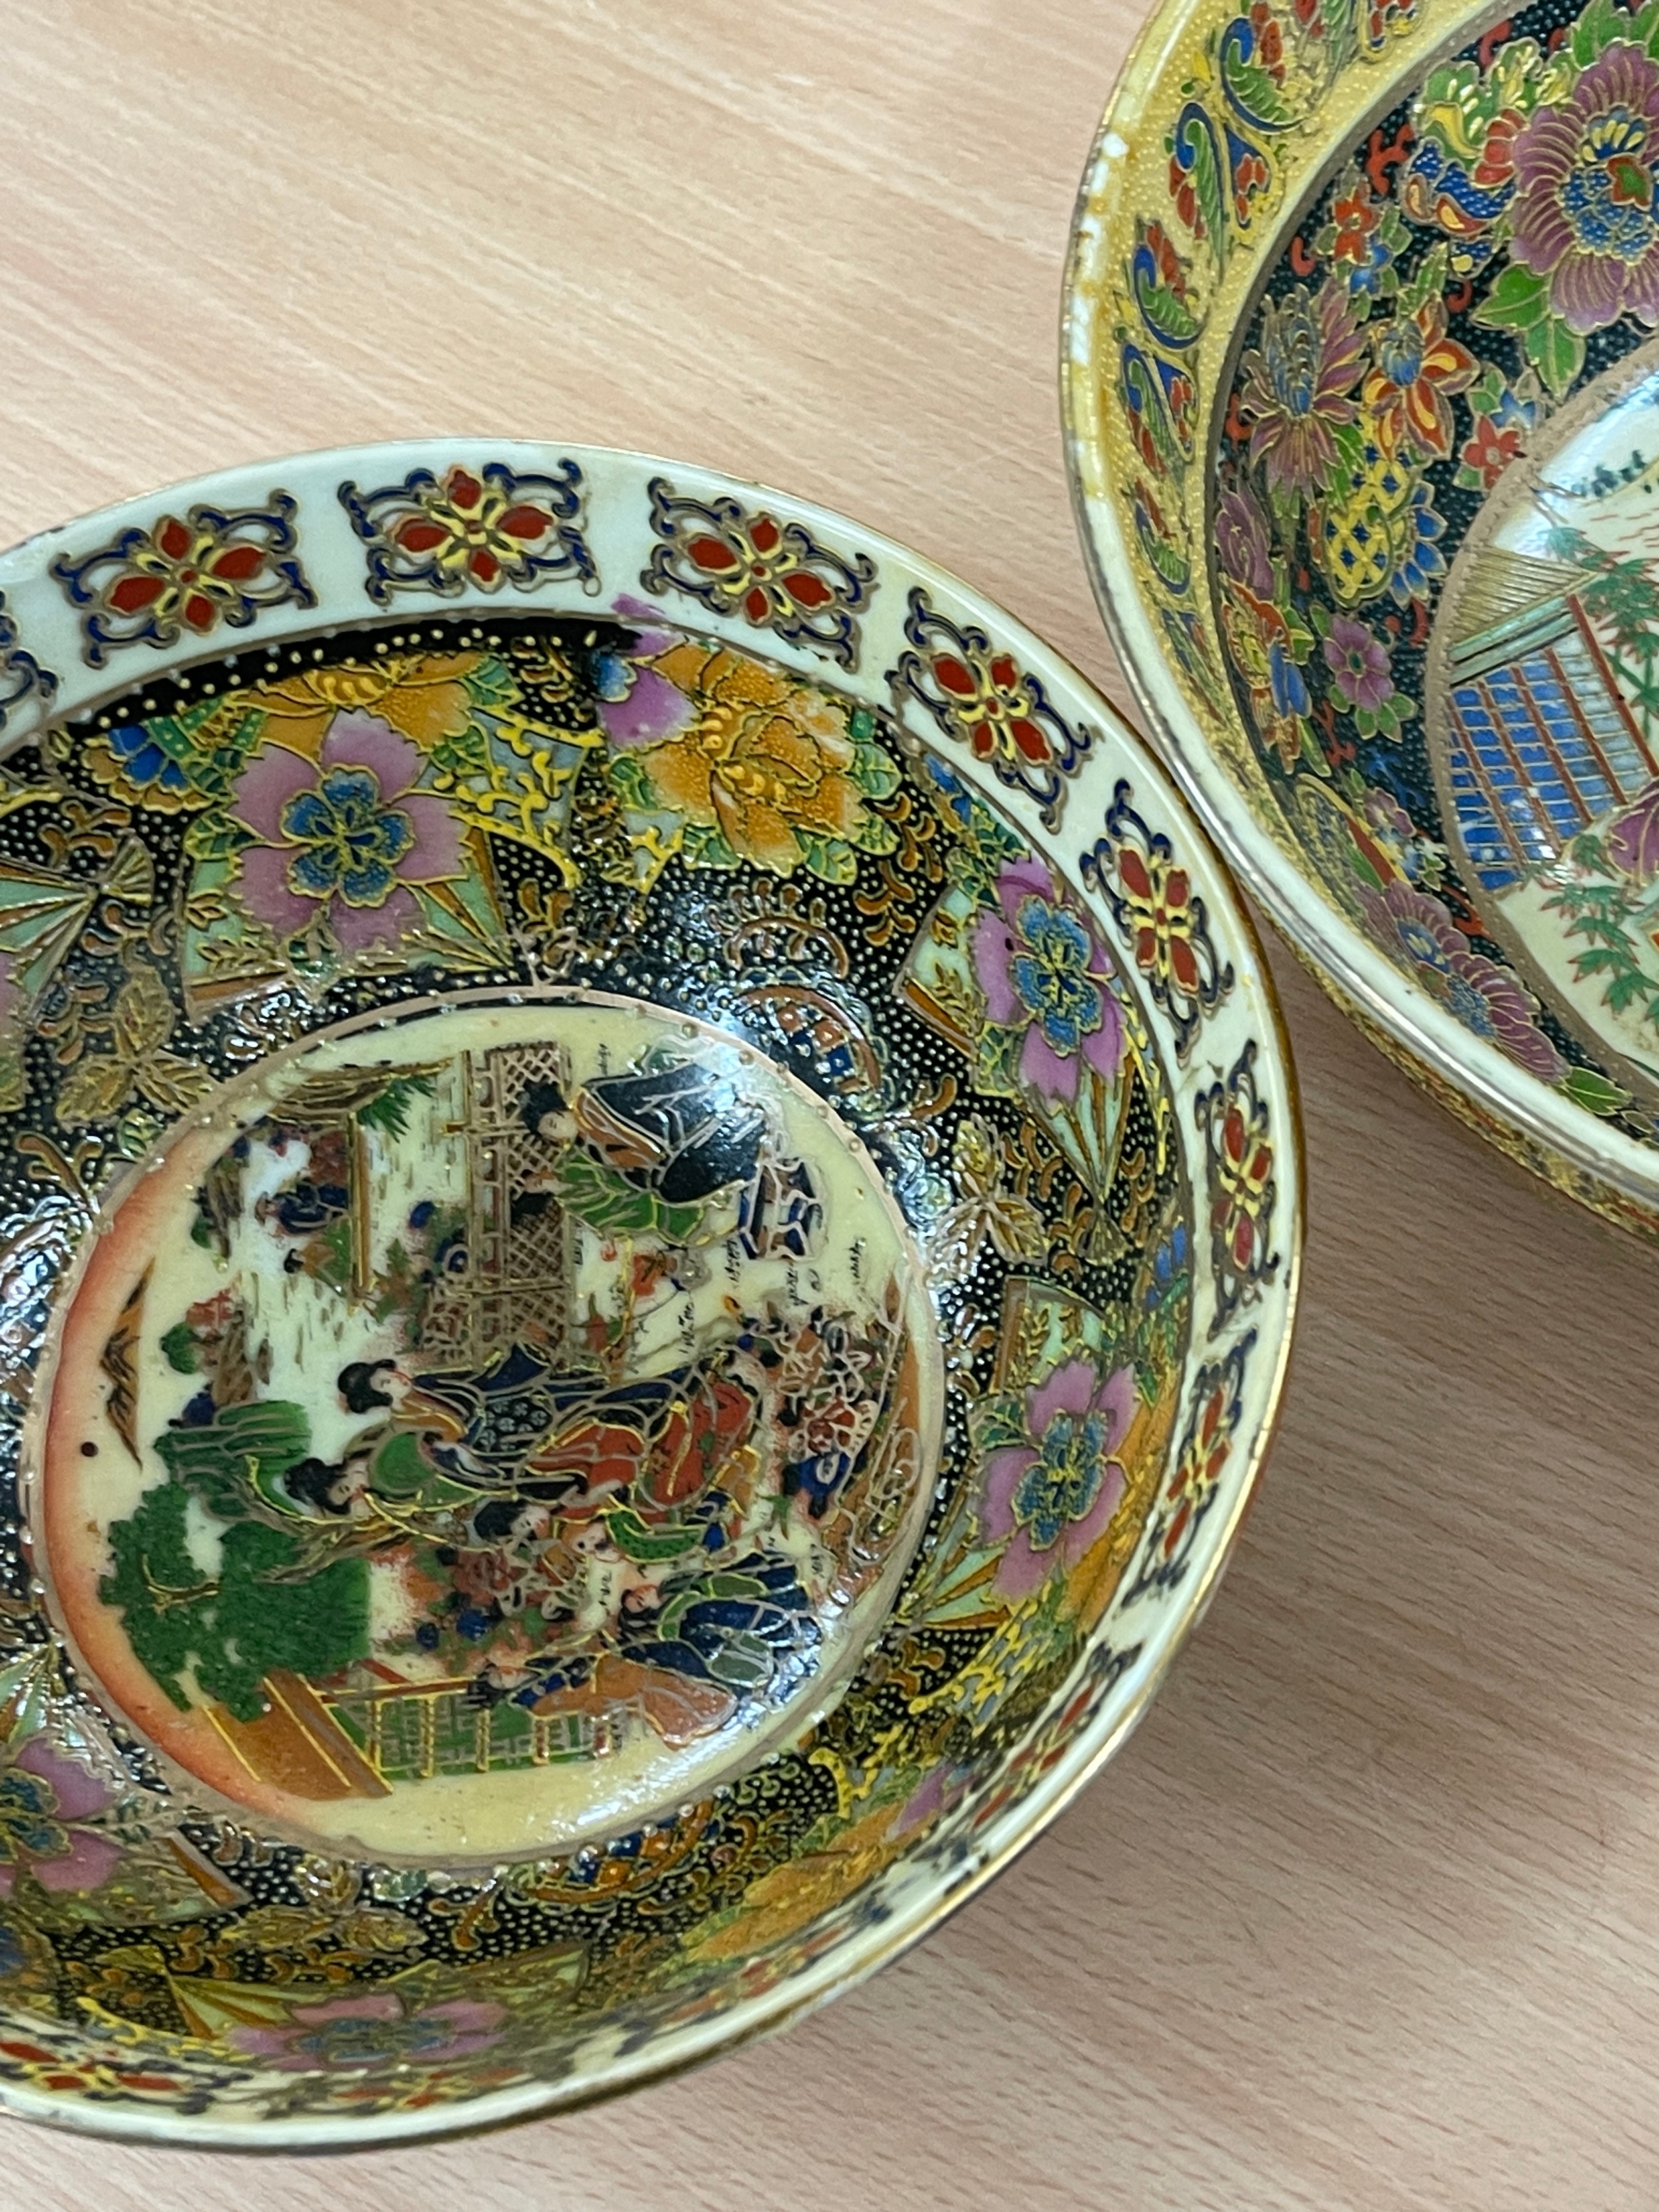 2 Japanese hand painted bowls, largest measures approximately 10 inches diameter 4.5 inches tall - Image 5 of 8